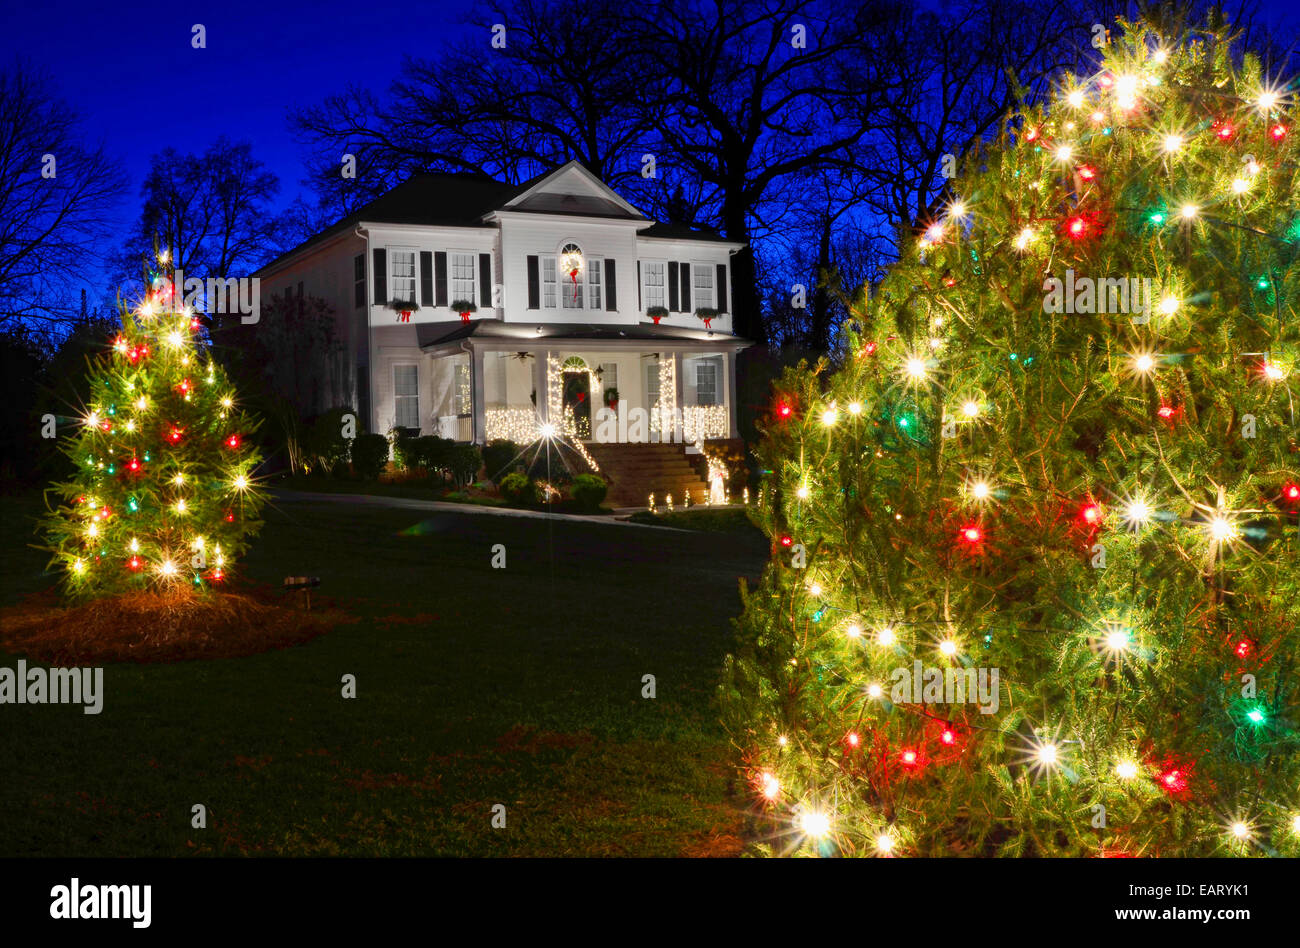 Outdoor Christmas Trees have been decorated with red, green and white Stock Photo, Royalty Free ...